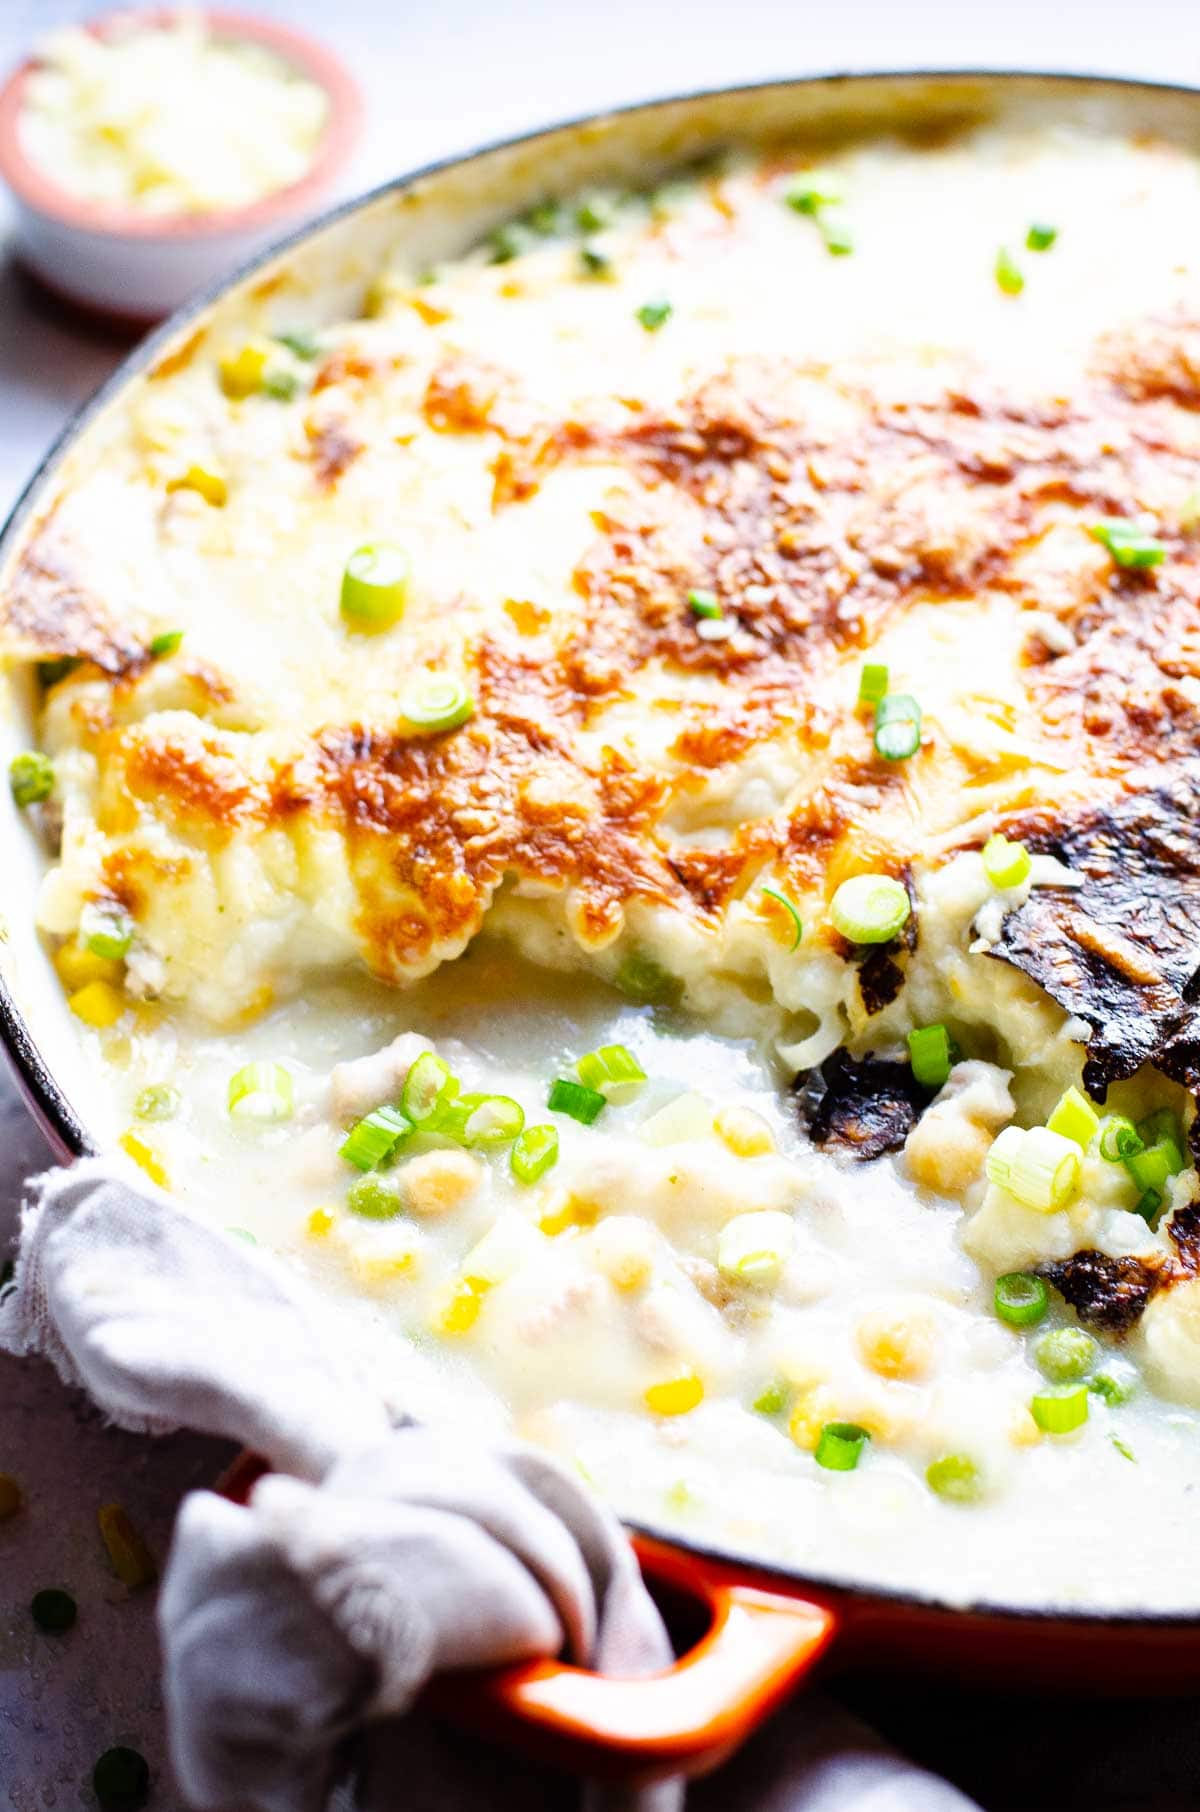 Cauliflower shepherd's pie with golden crust and saucy filling in large skillet.